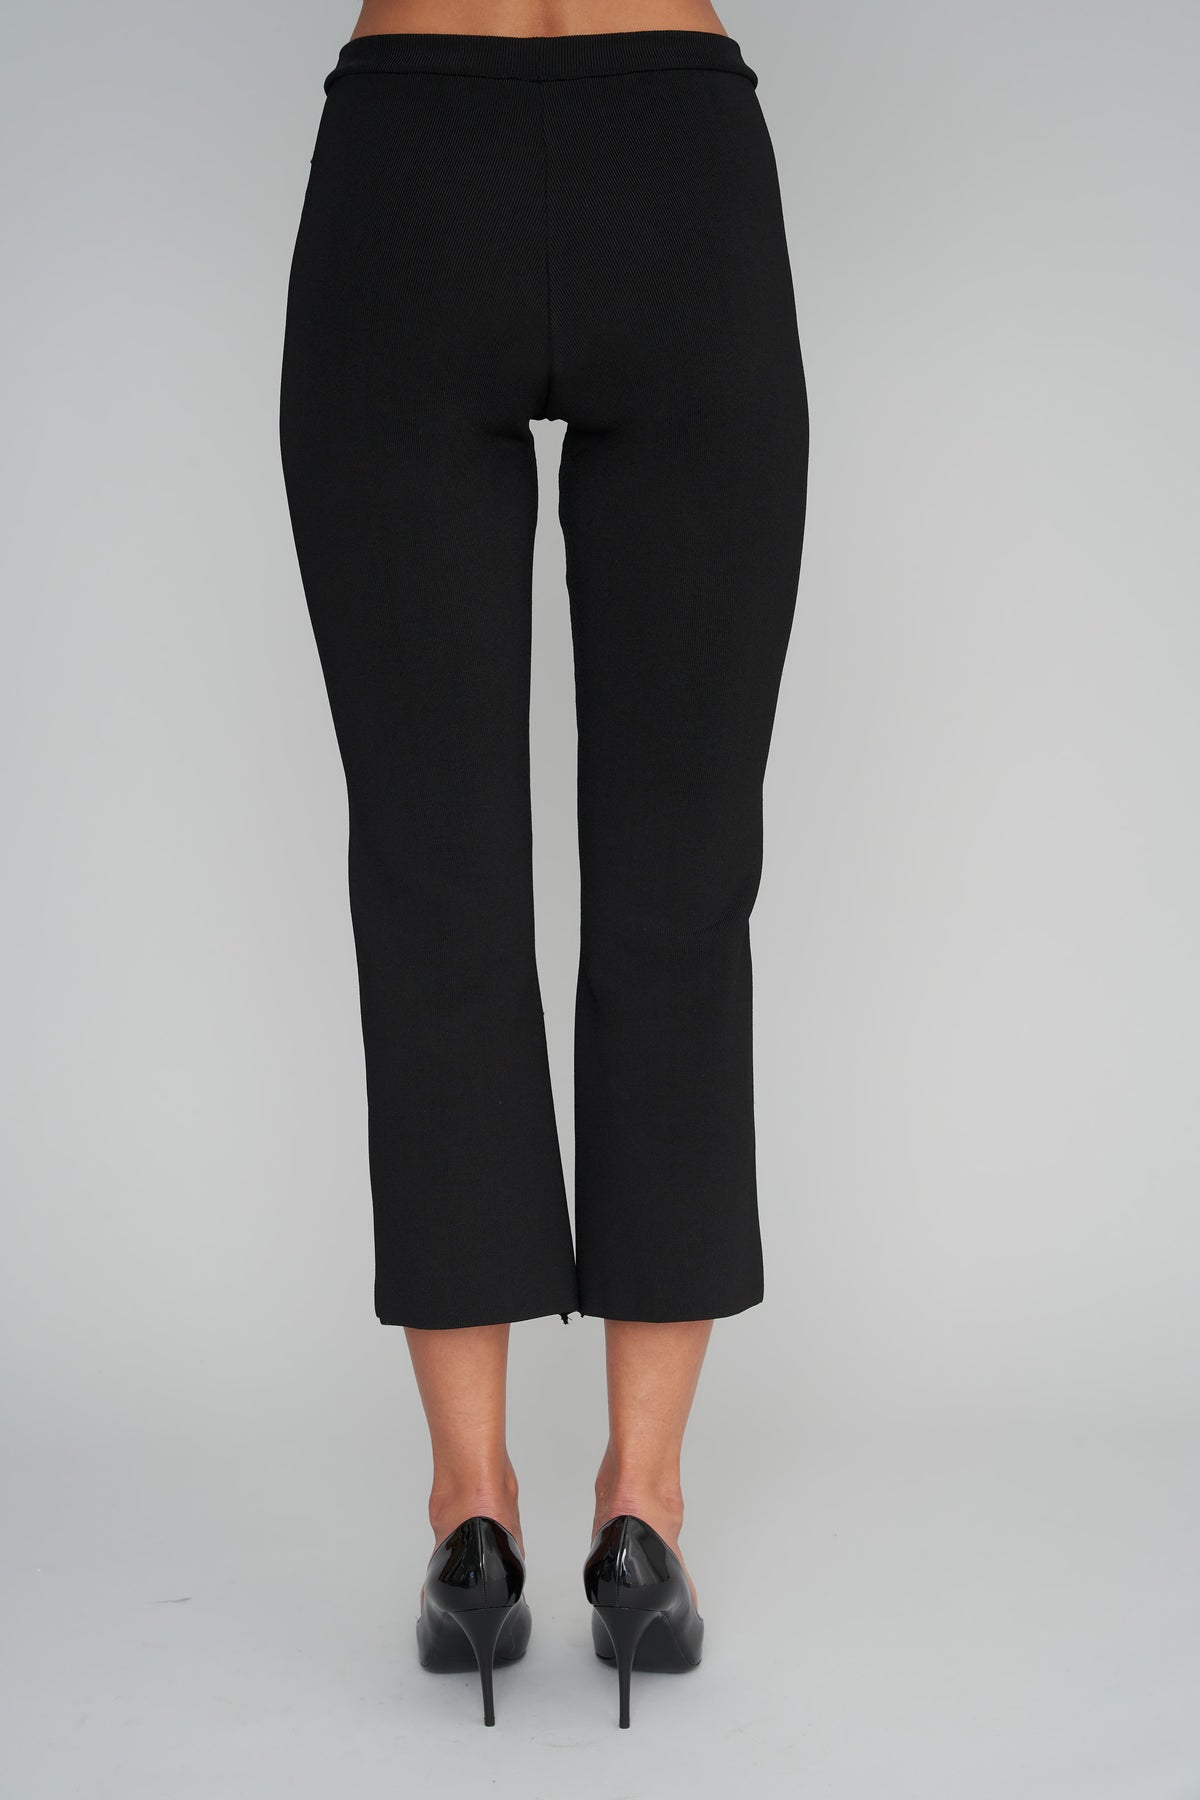 The Broadway Pant